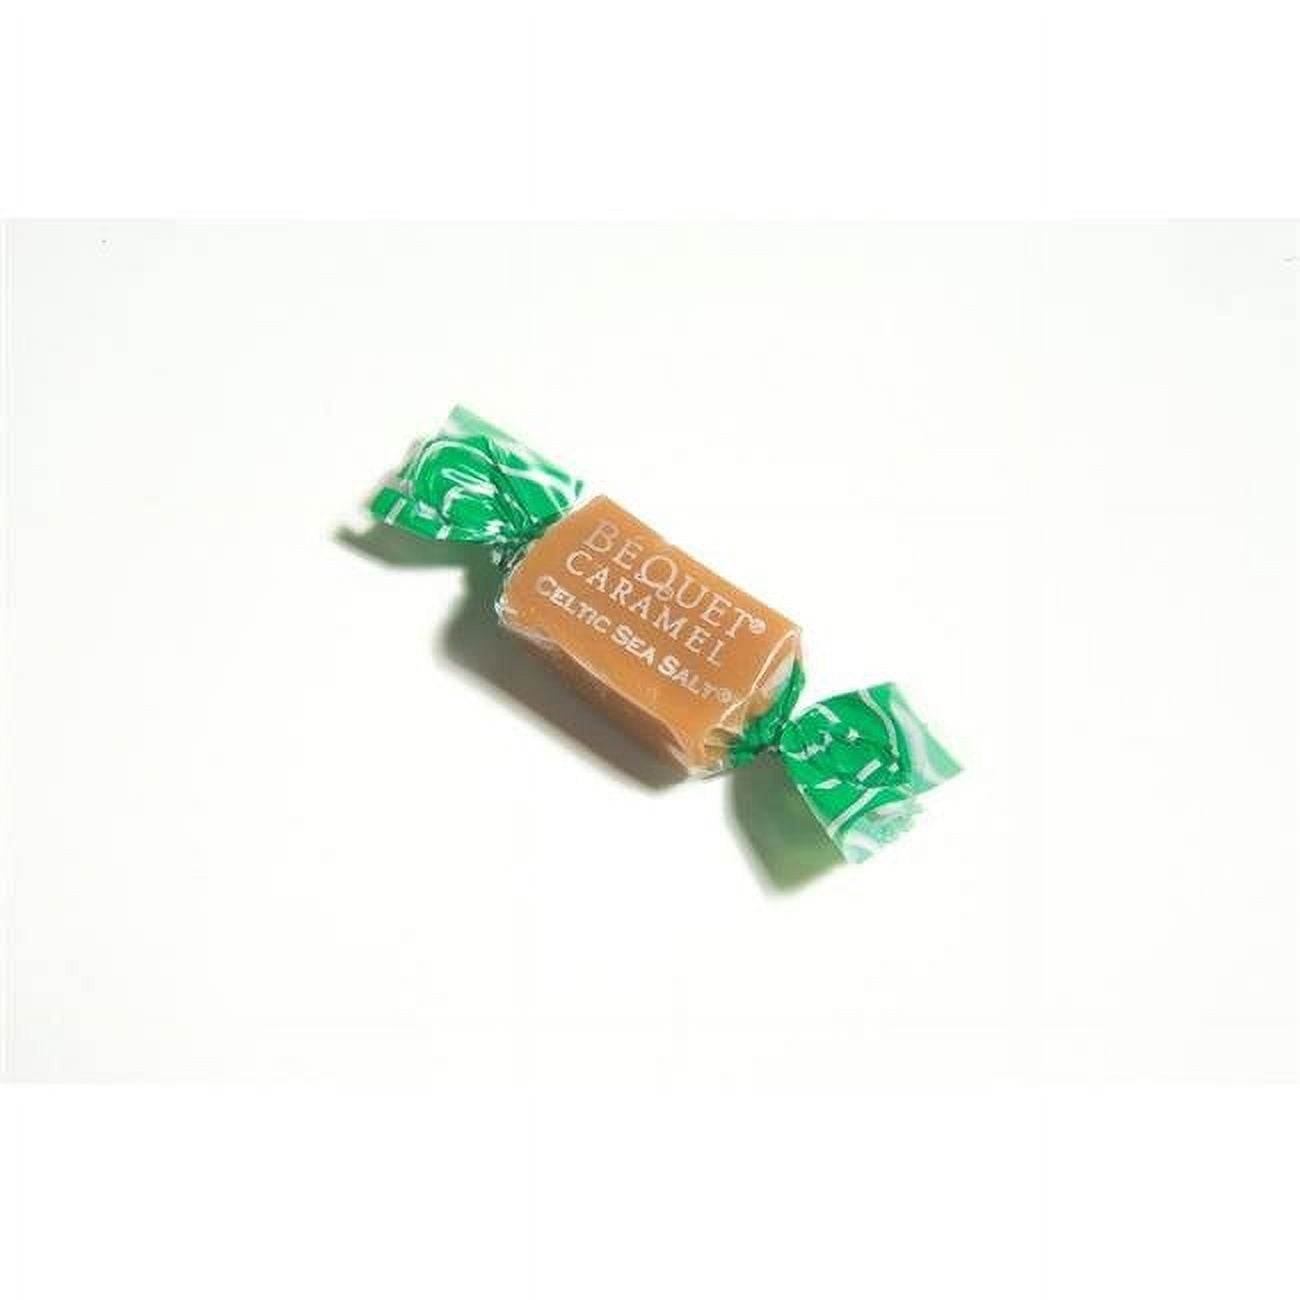 Picture of Bequet 9058704 Celtic Sea Salt Caramel Candy